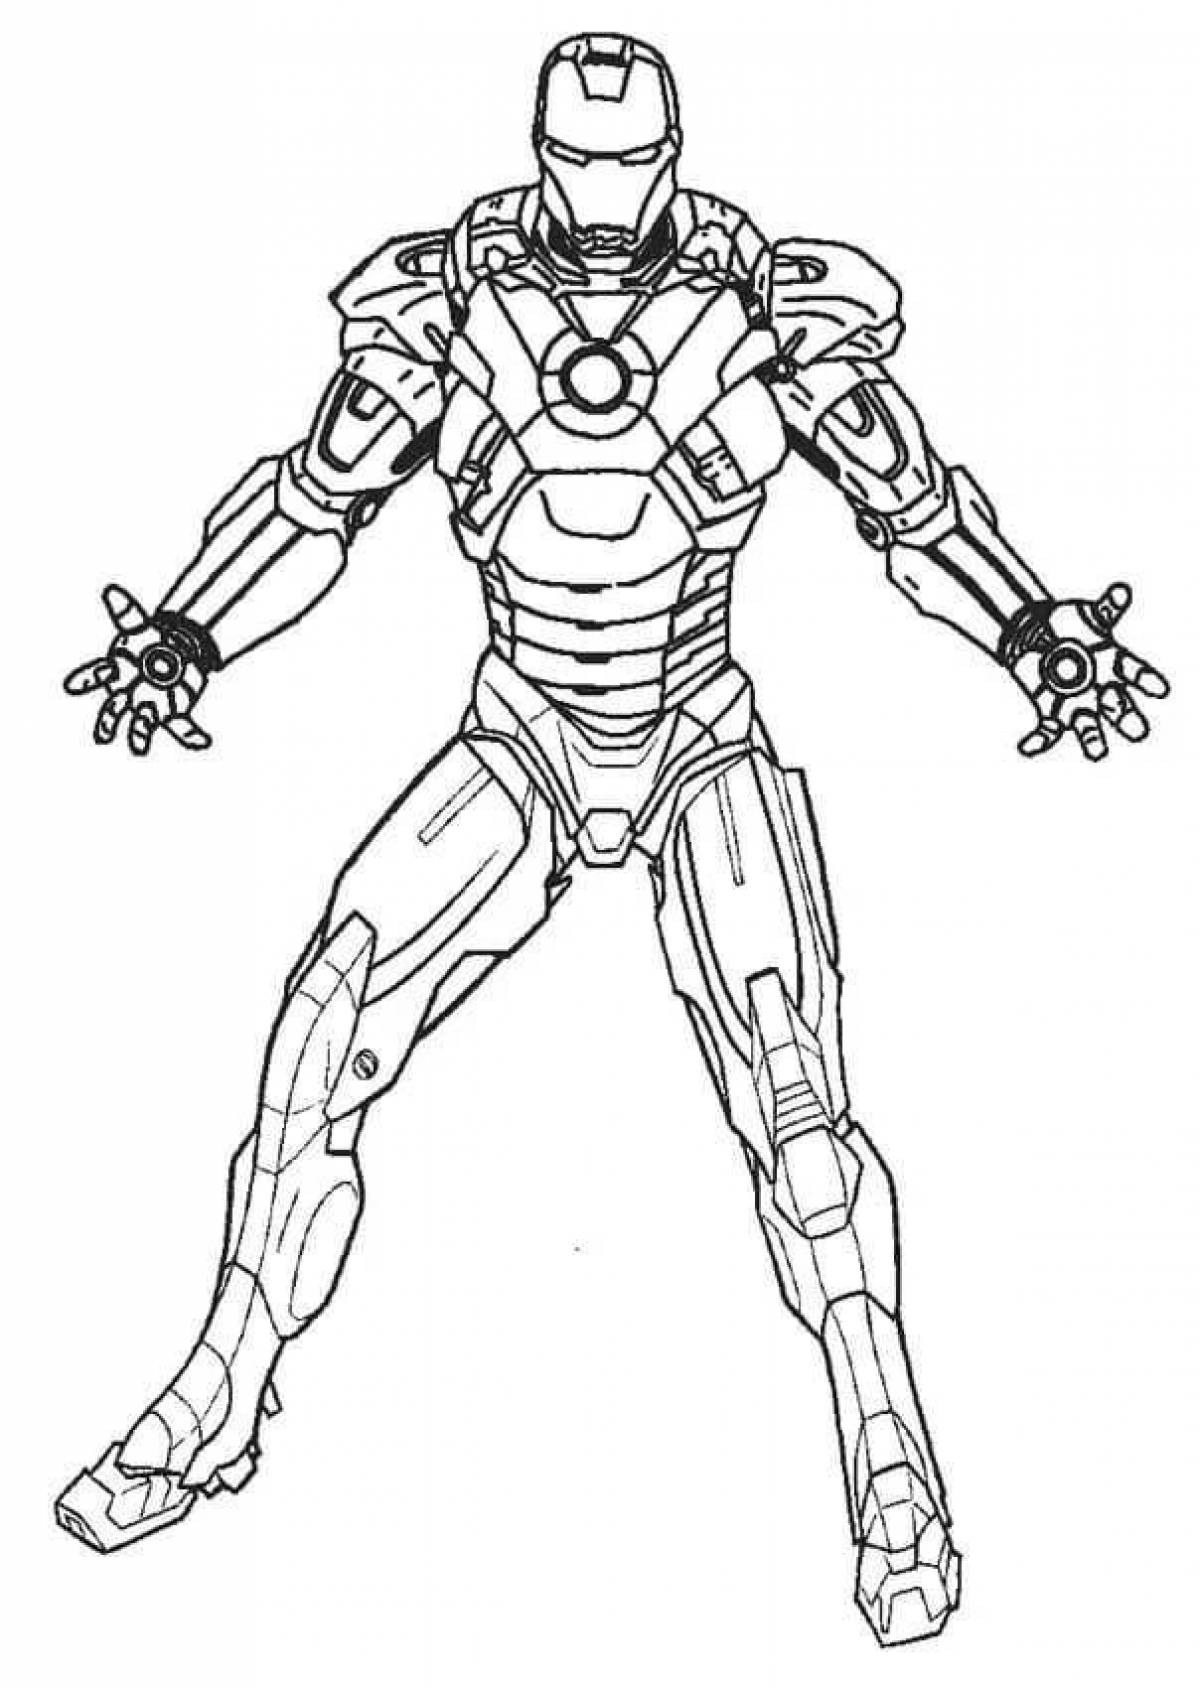 Great iron man coloring book for kids